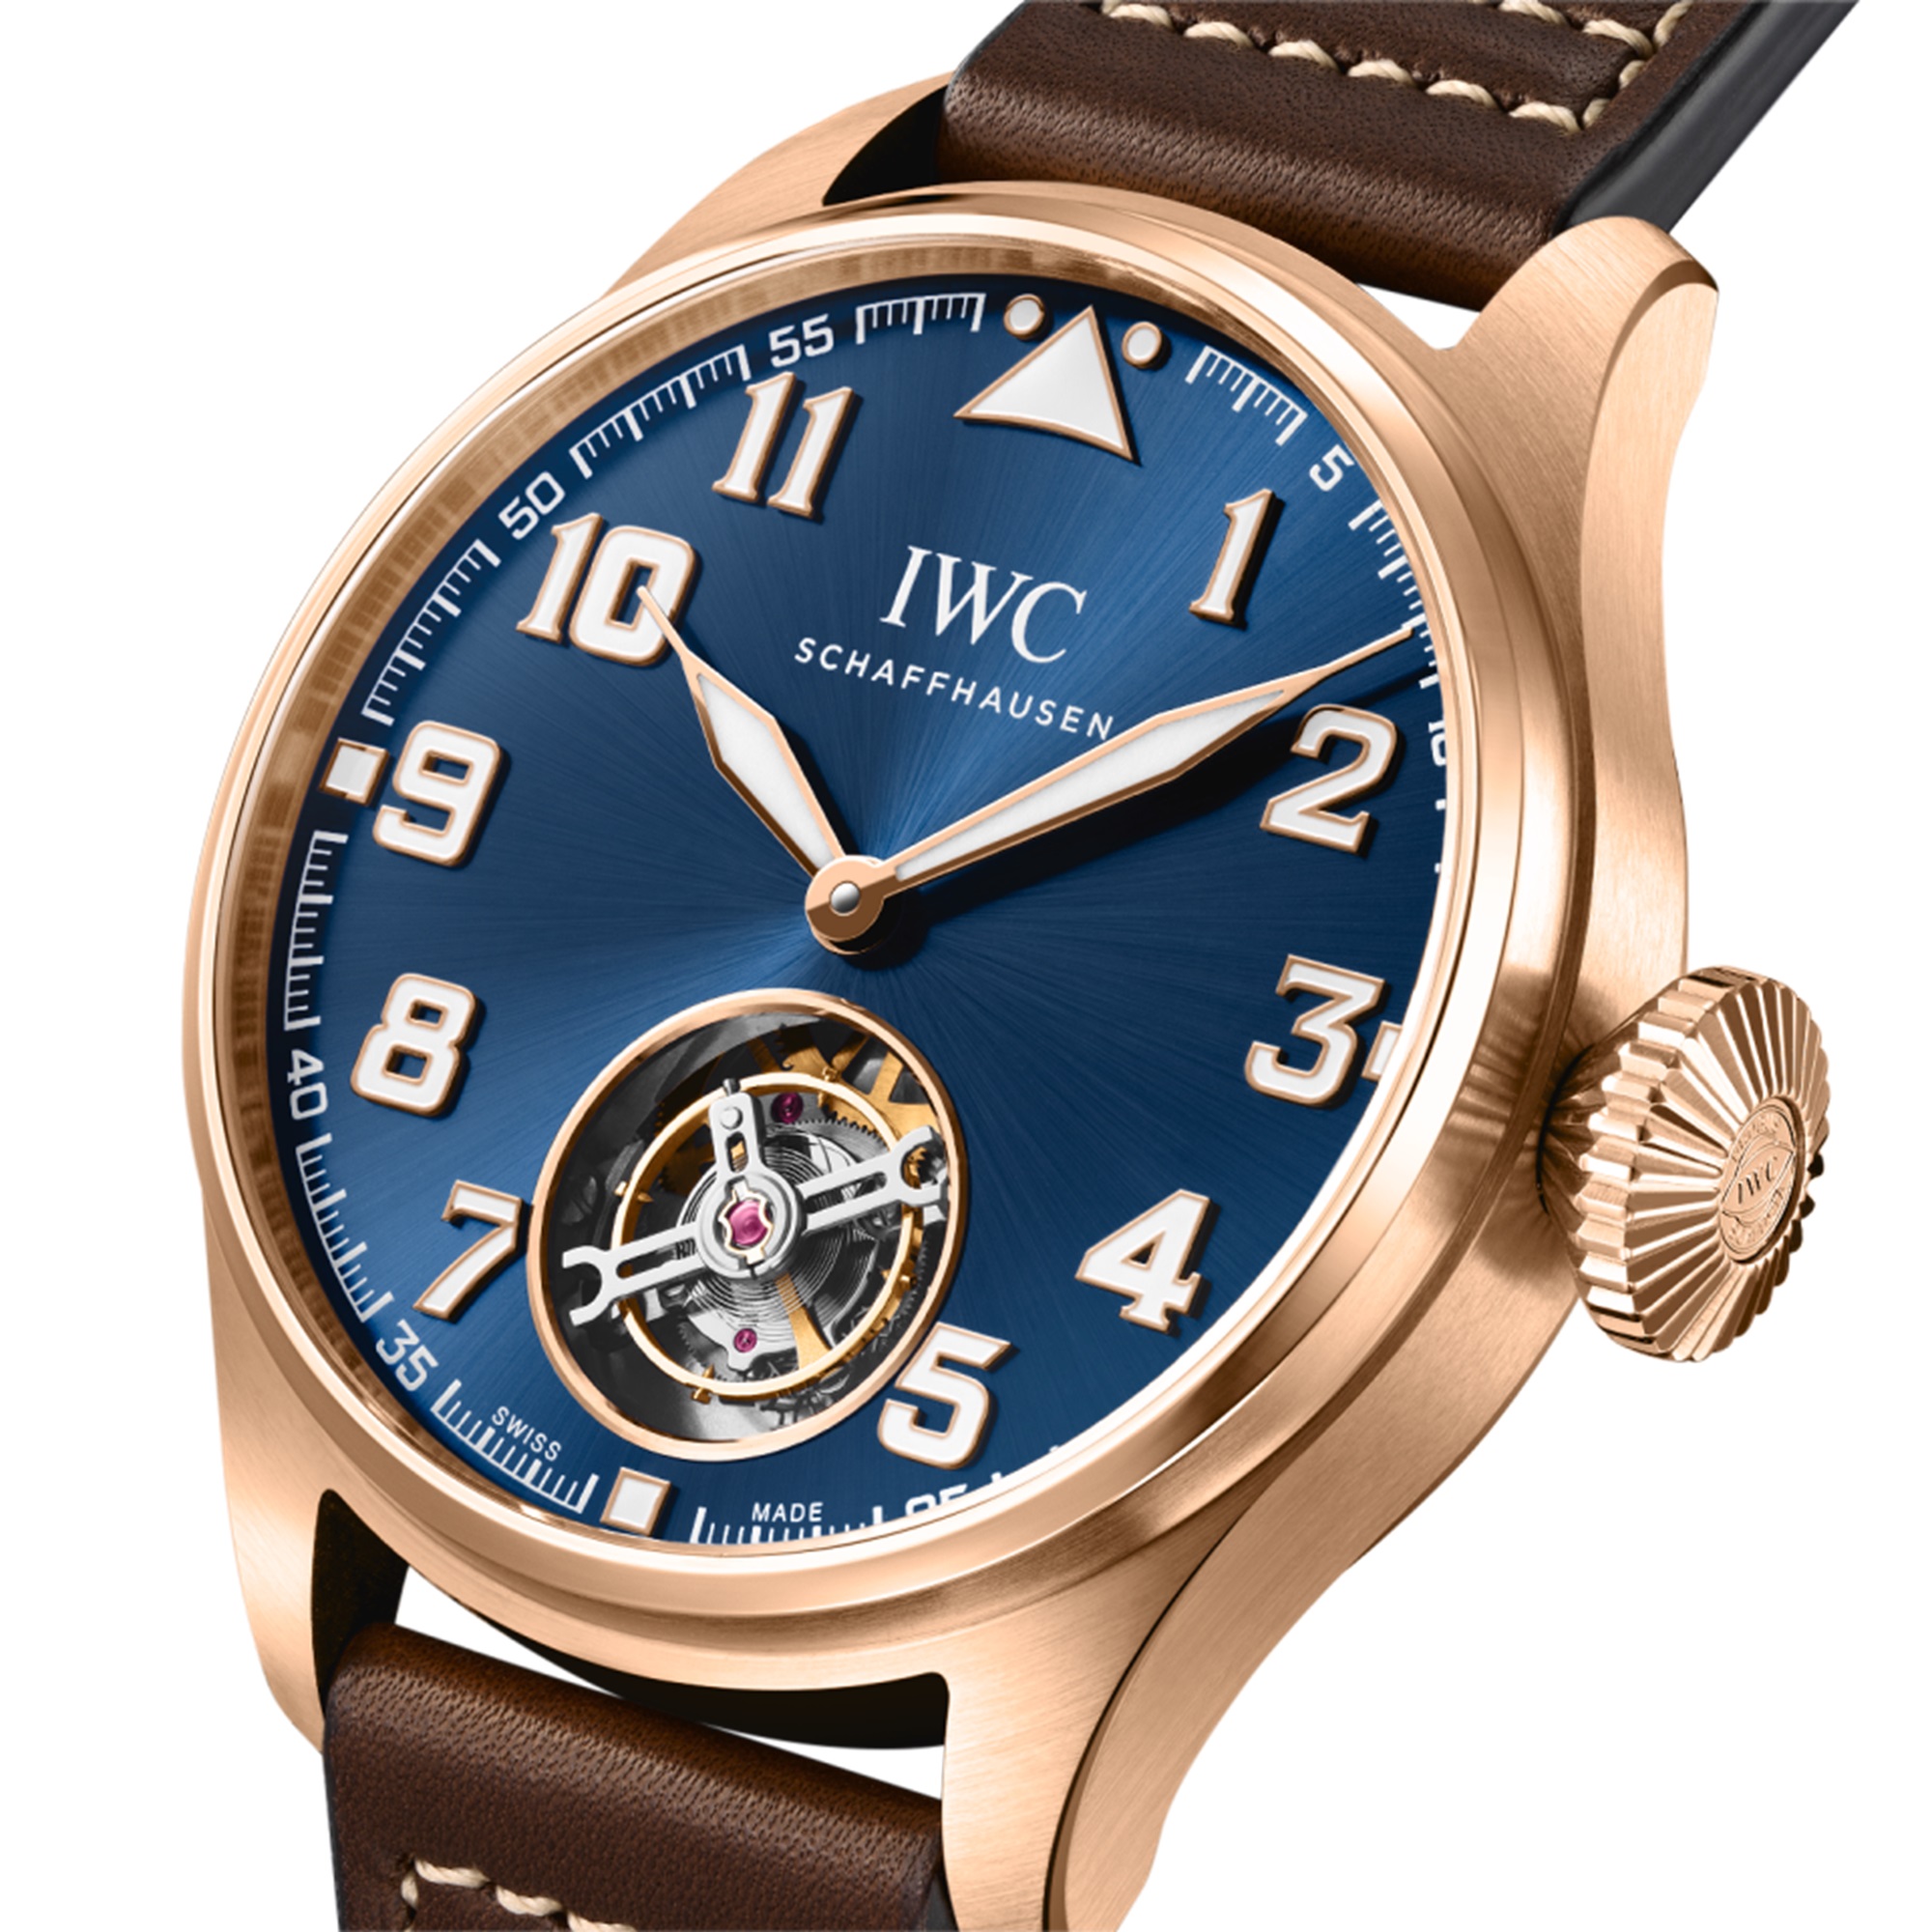 IWC Schaffhausen | Pilot's Watch 'Le Petit Prince', Reference IW392202,  Limited Edition 5N Gold Perpetual Calendar Flyback Chronograph Wristwatch  with Moon-Phases and 4-Digit Year Indication, circa 2019 | Watches Online |  Watches | Sotheby's